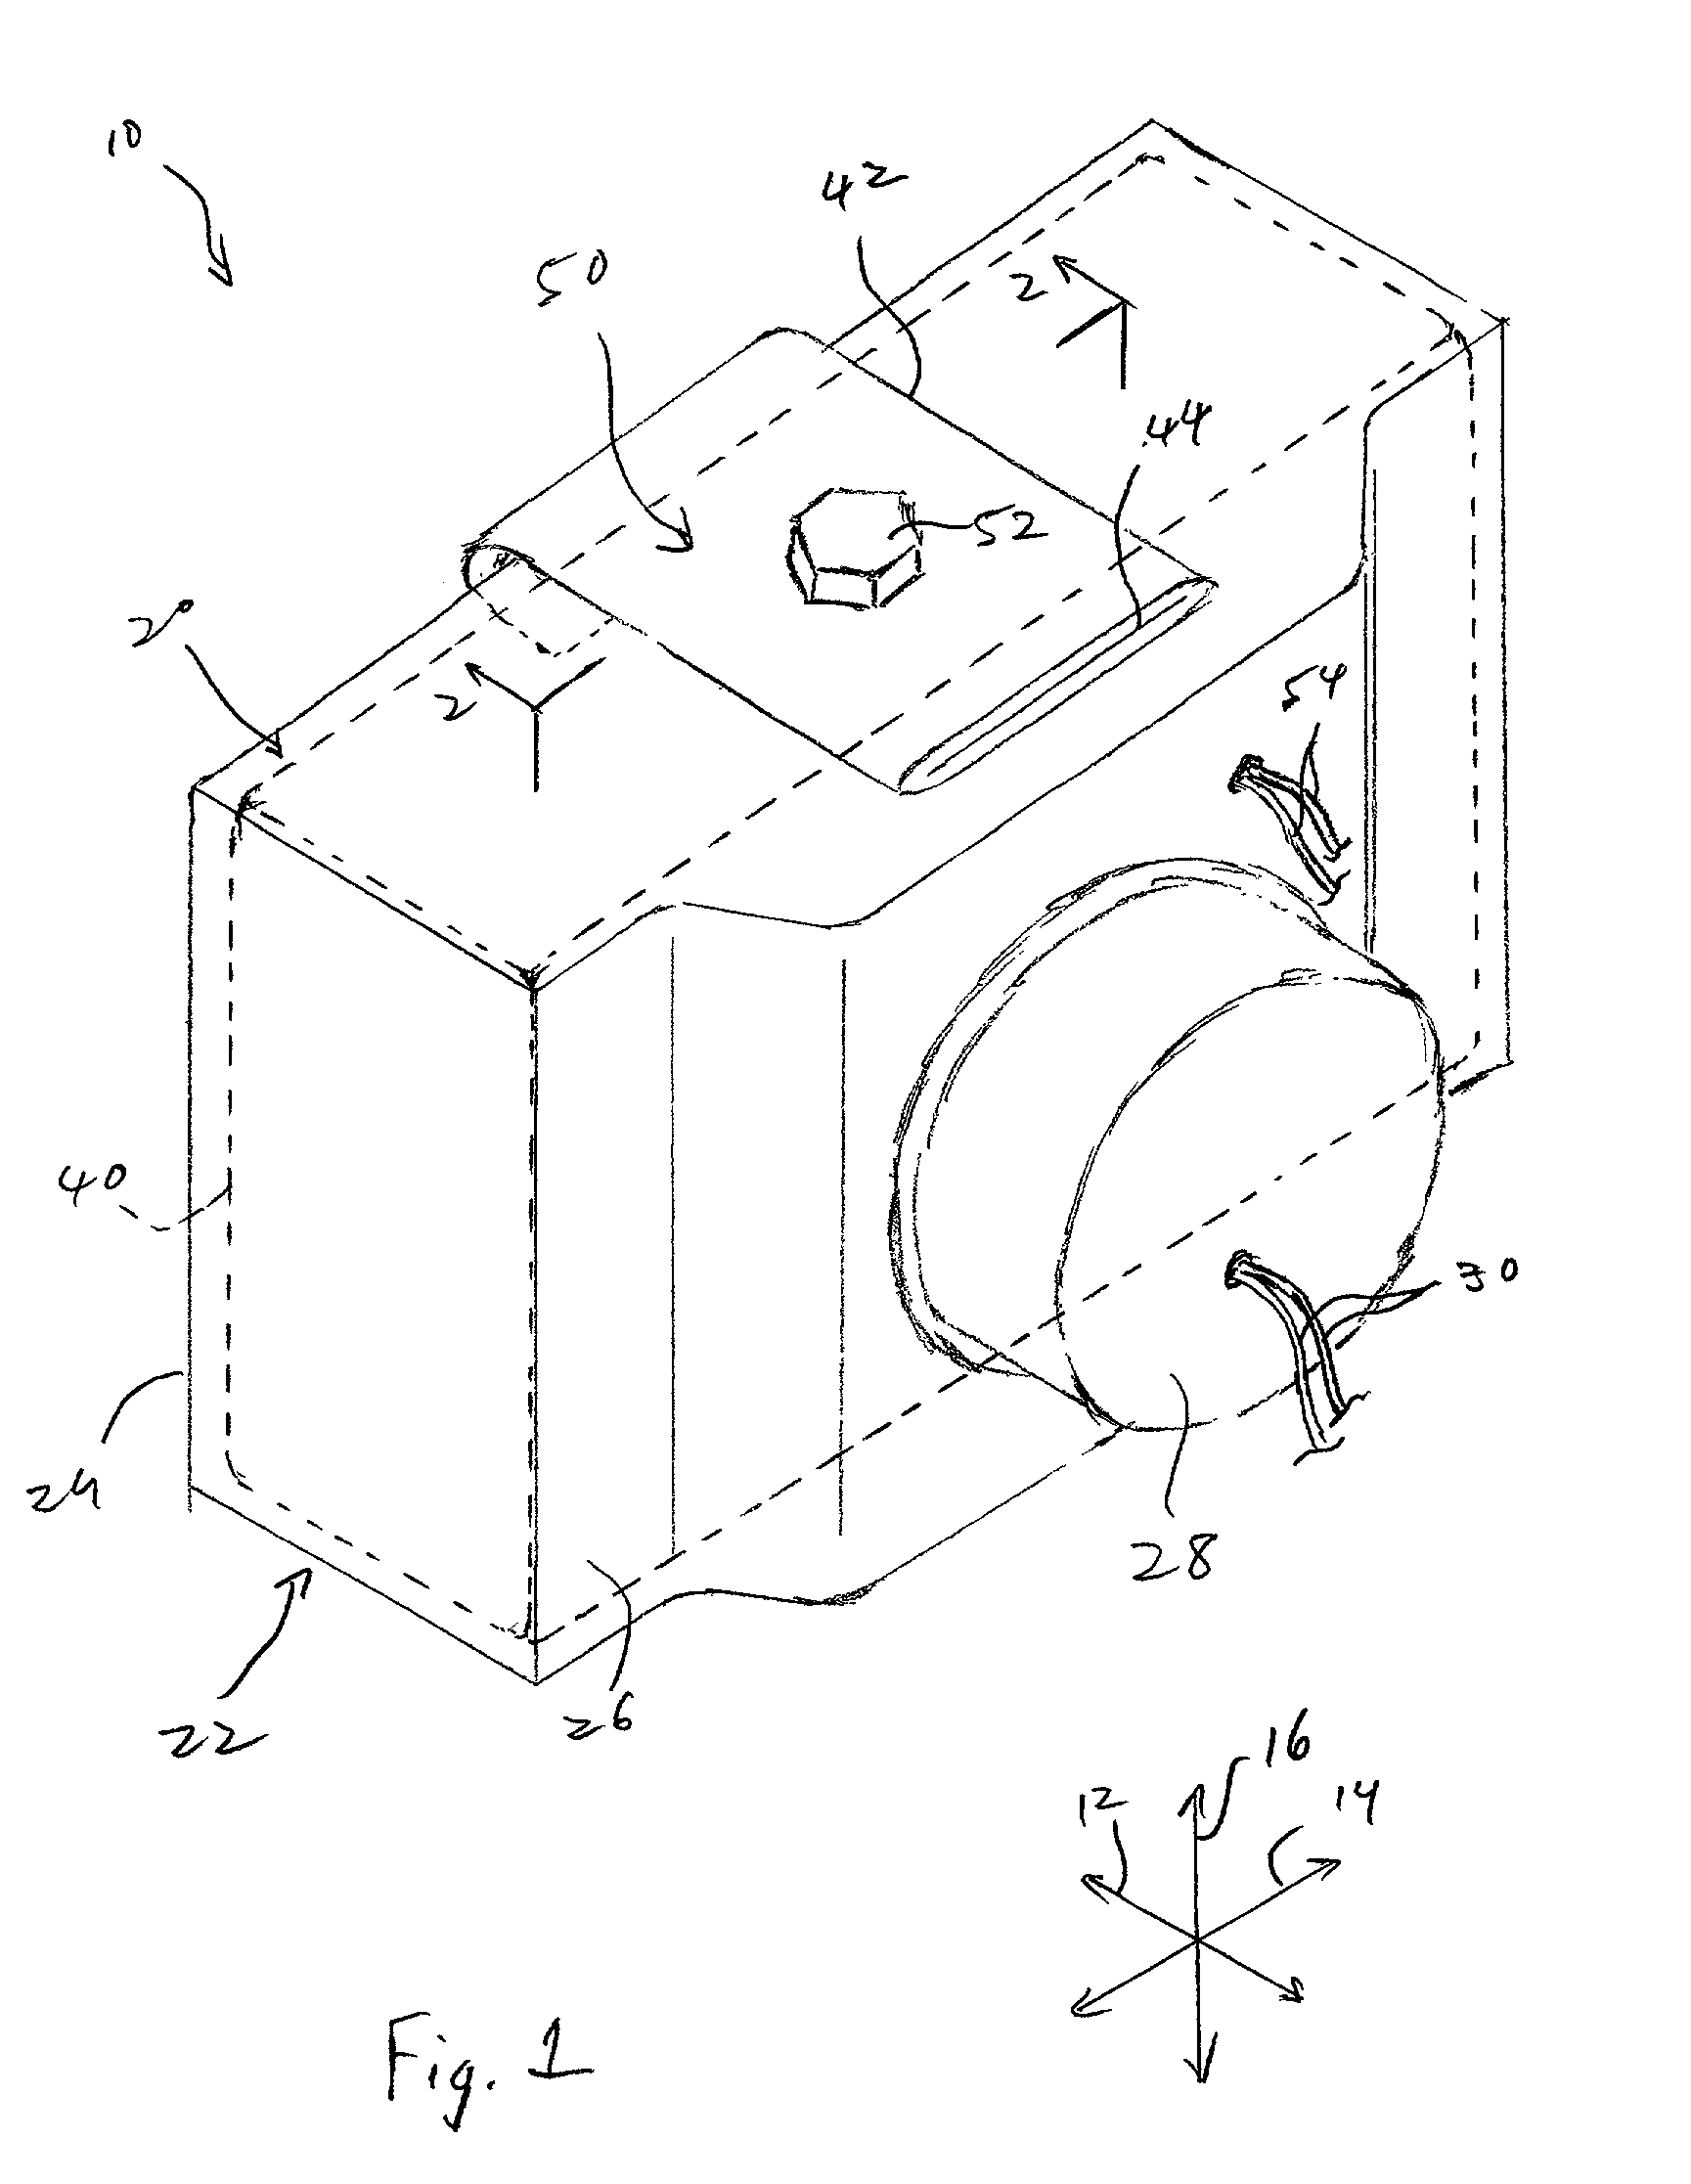 Active venting apparatus and method for airbag systems